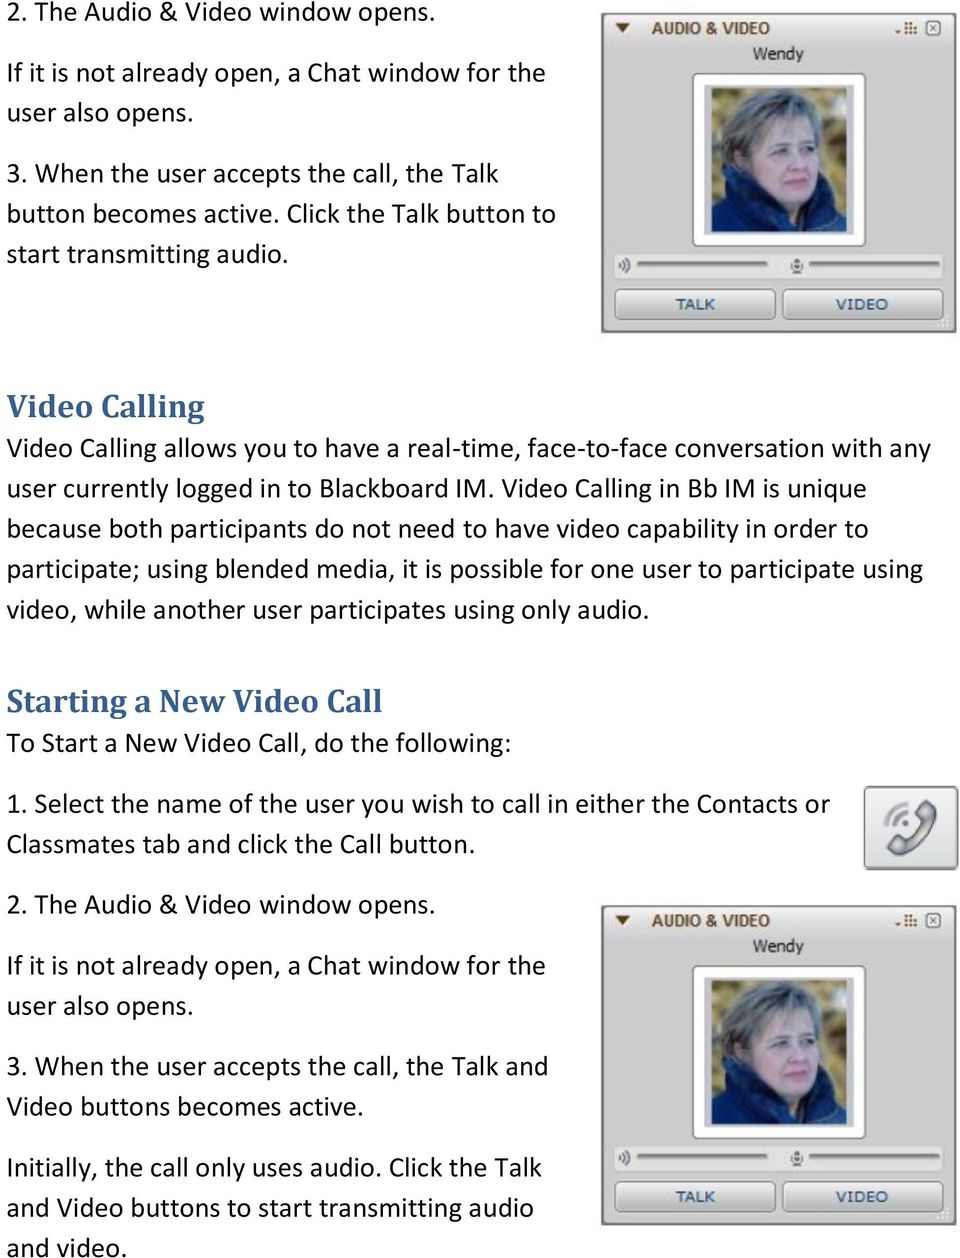 Video Calling in Bb IM is unique because both participants do not need to have video capability in order to participate; using blended media, it is possible for one user to participate using video,